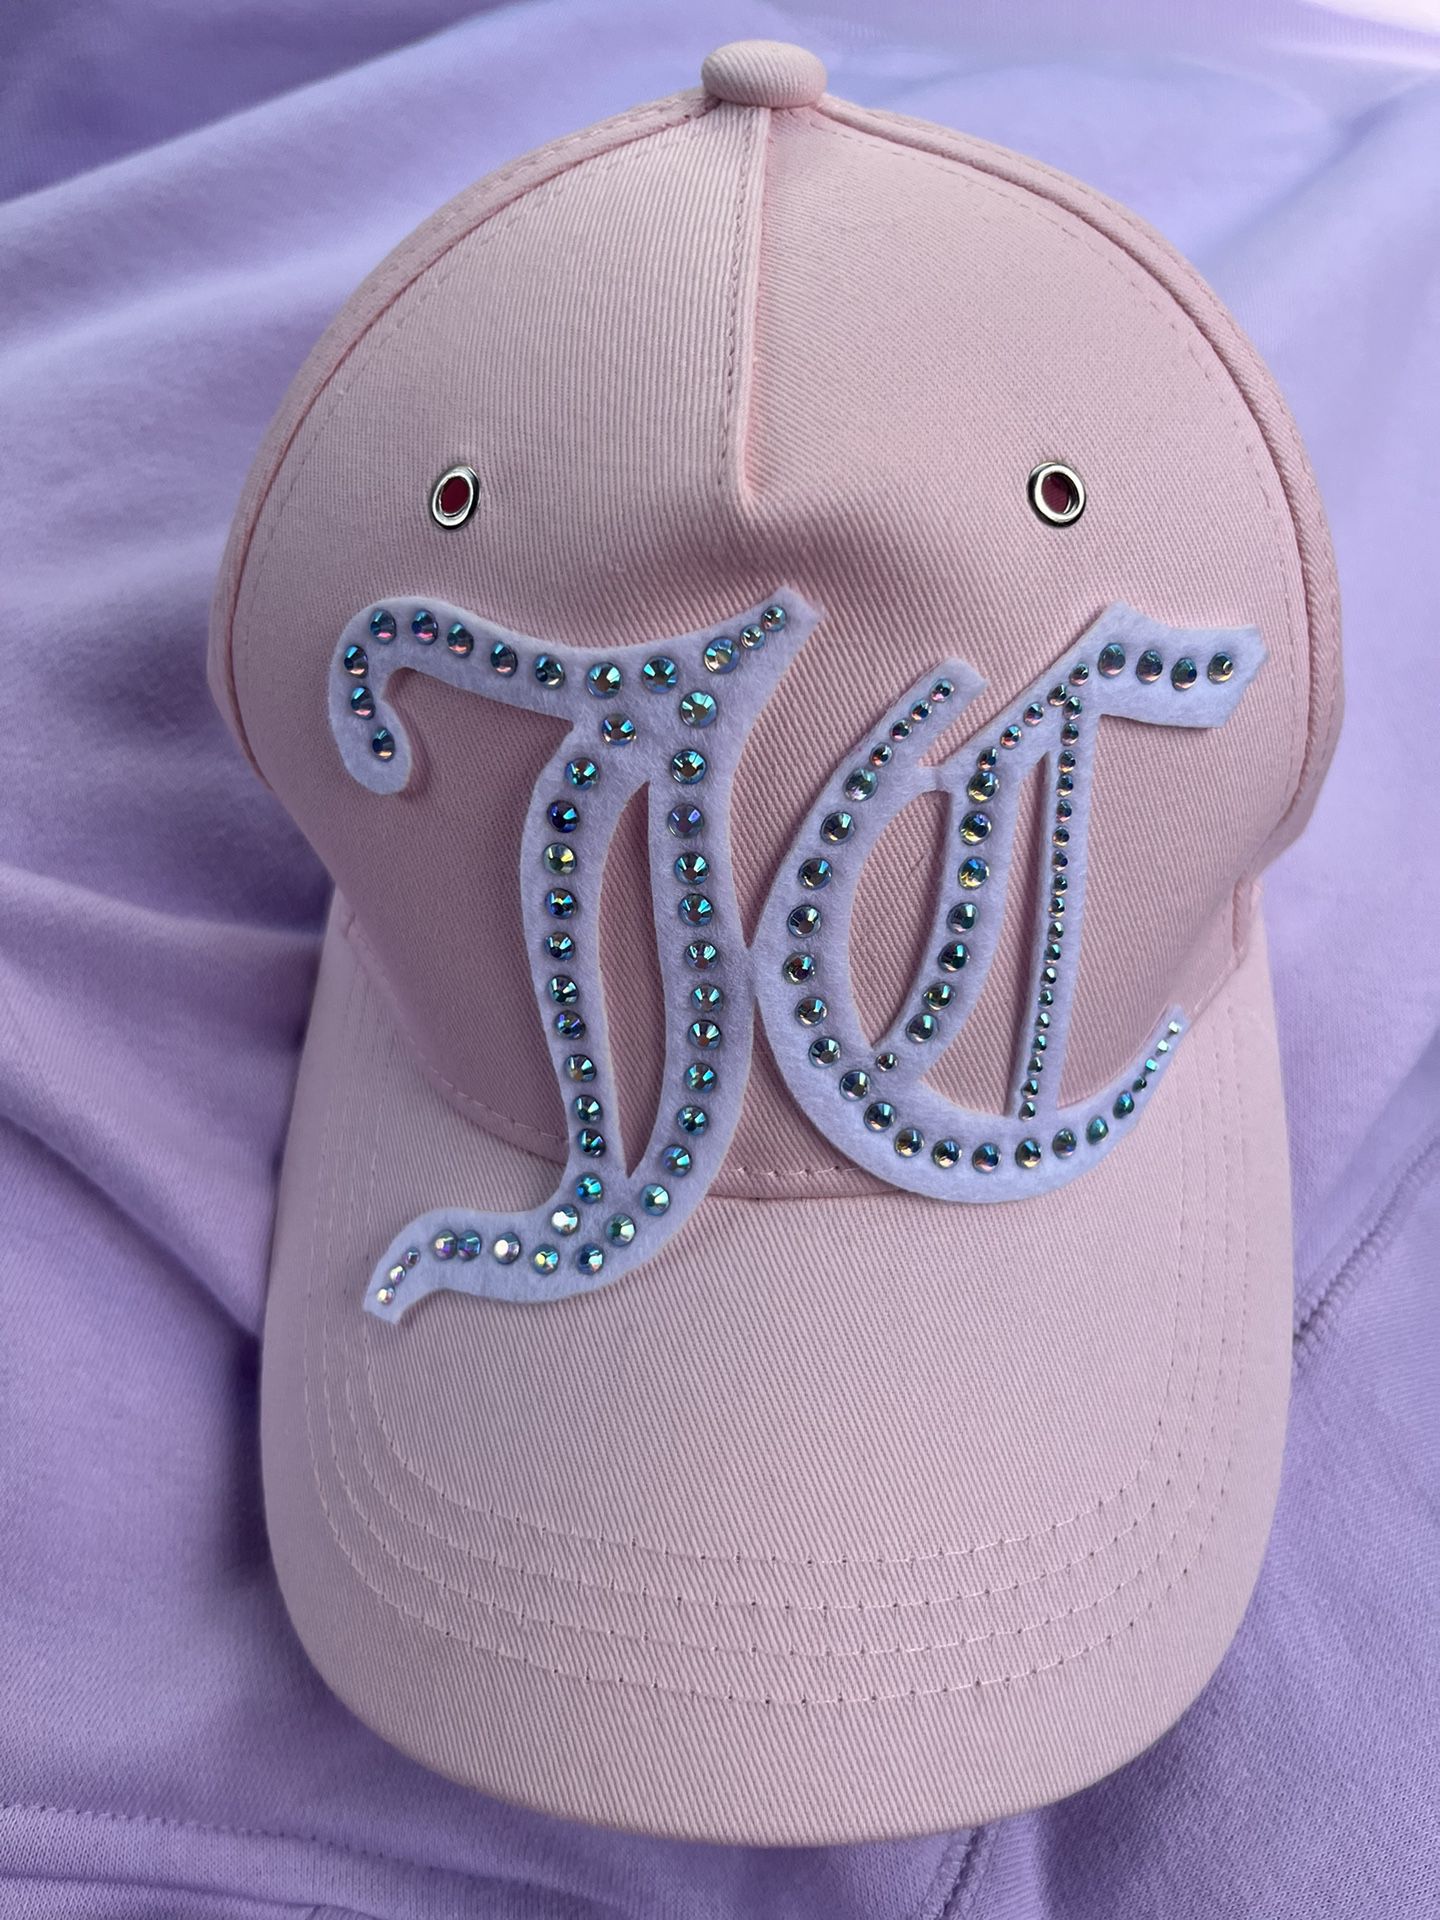 NWT 💎💖💎 Juicy Couture bling rhinestones logo baby pink baseball cap one size